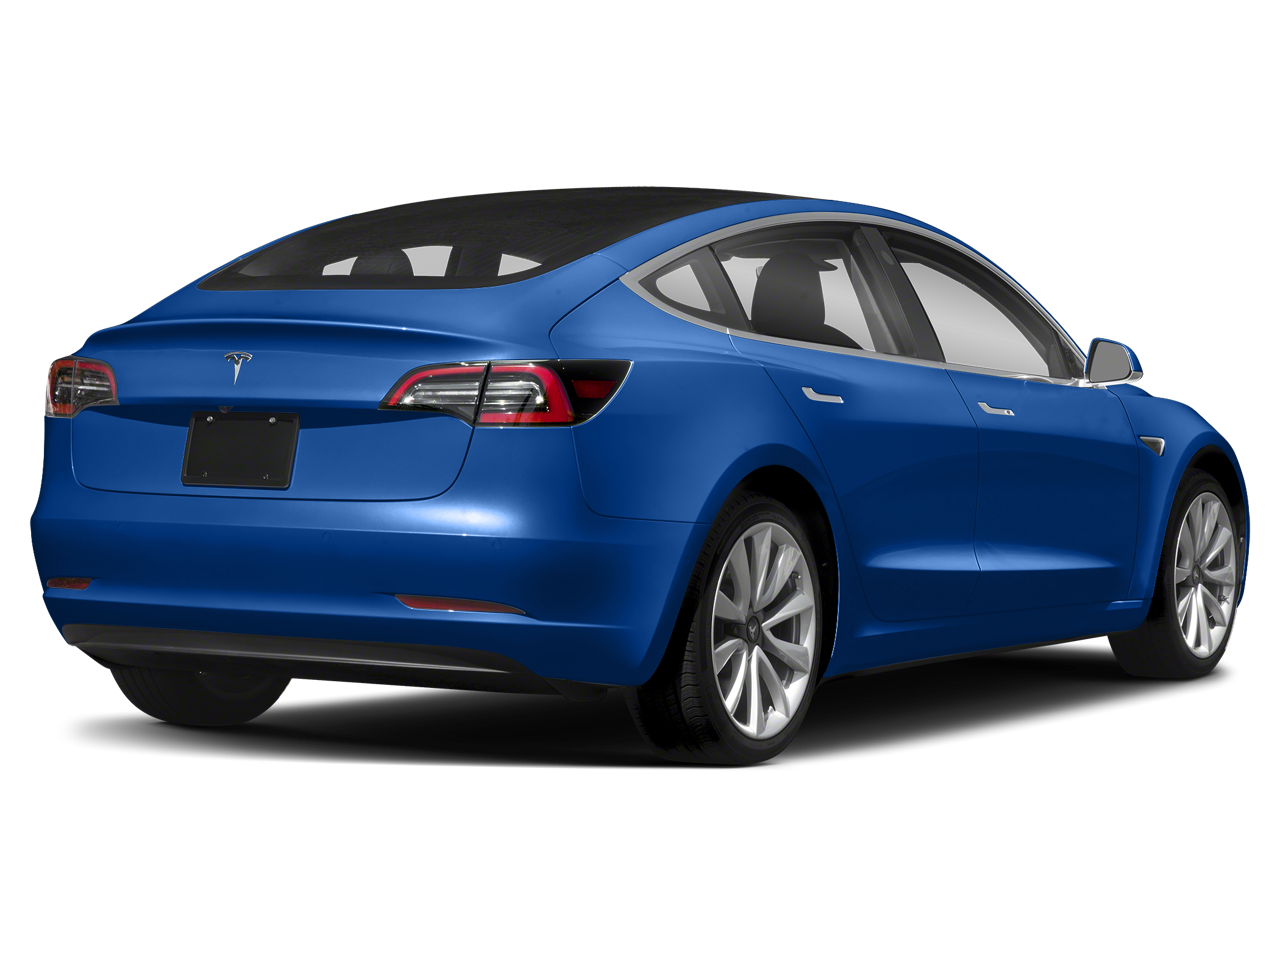 Used 2019 Tesla Model 3  with VIN 5YJ3E1EB5KF535019 for sale in Huntersville, NC